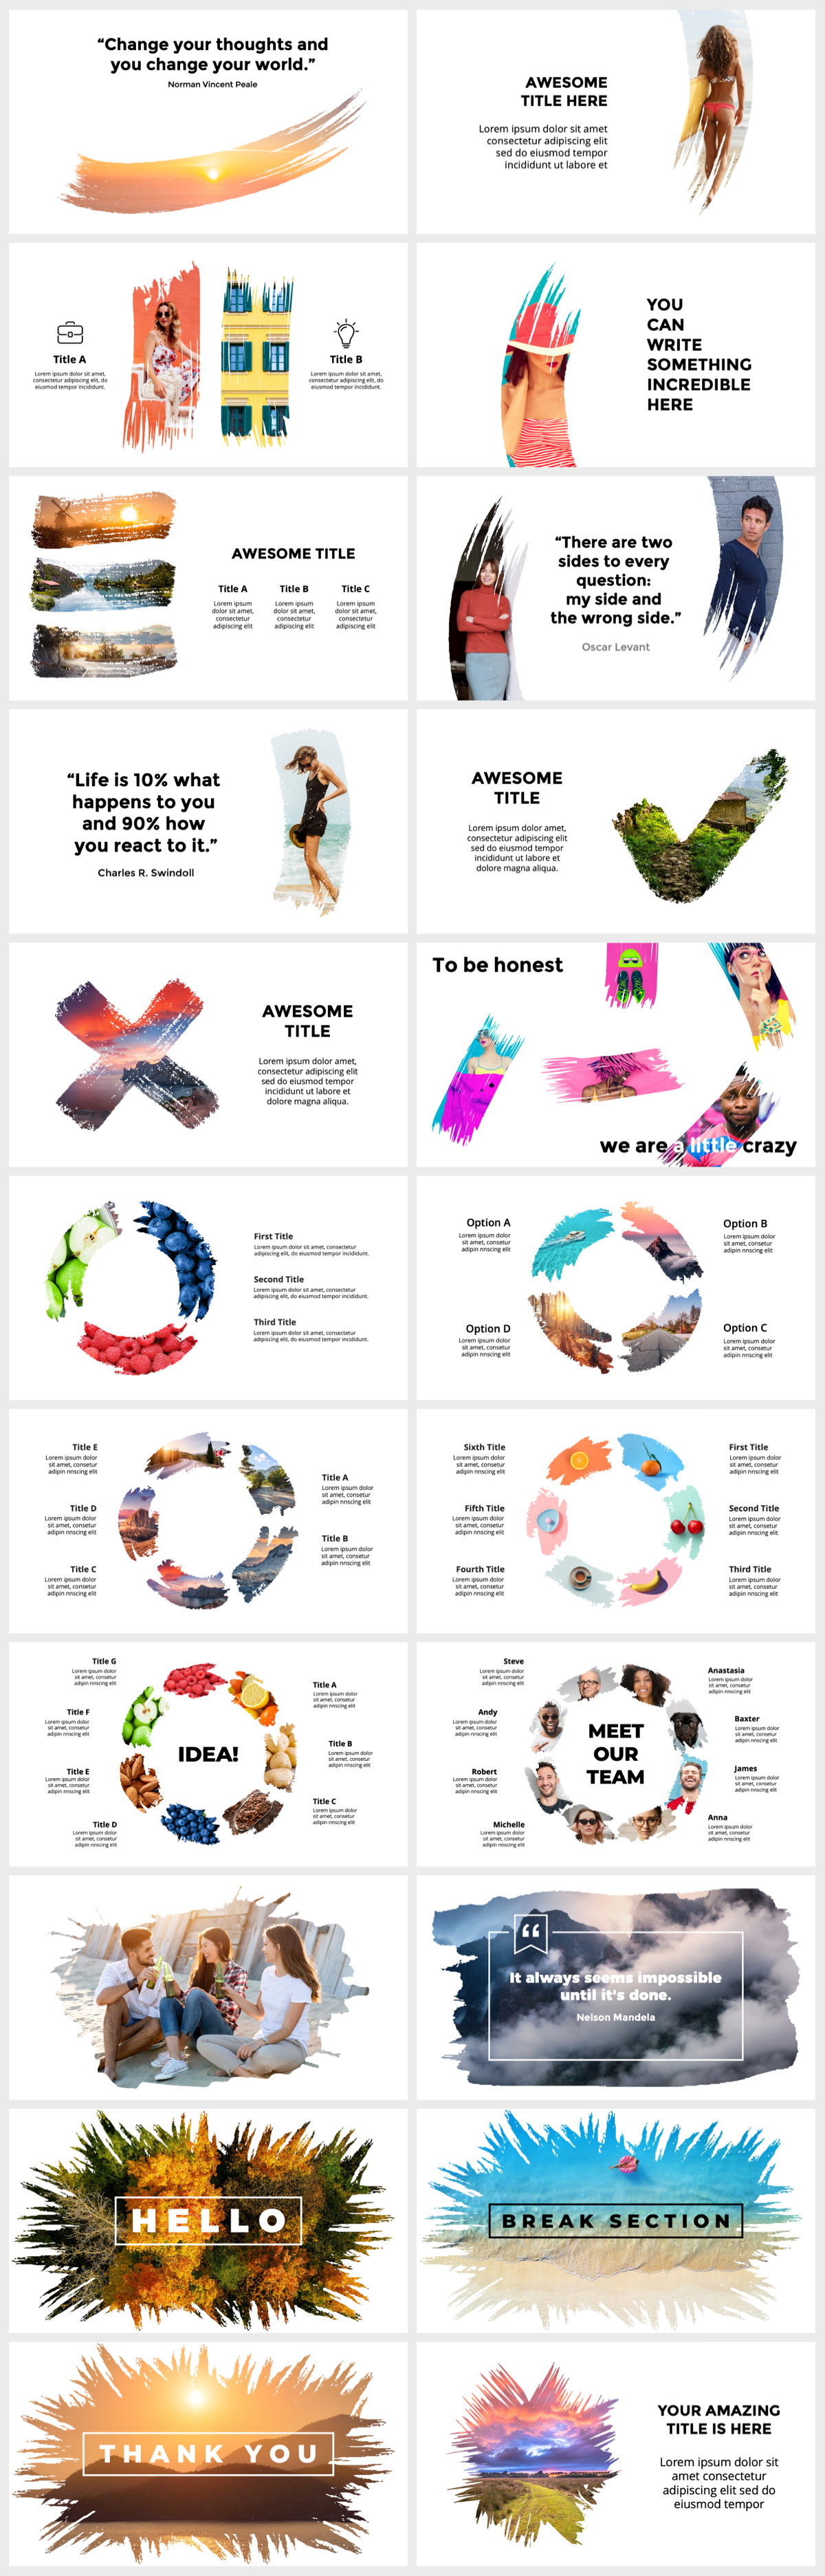 Wowly - 3500 Infographics & Presentation Templates! Updated! PowerPoint Canva Figma Sketch Ai Psd. - 226